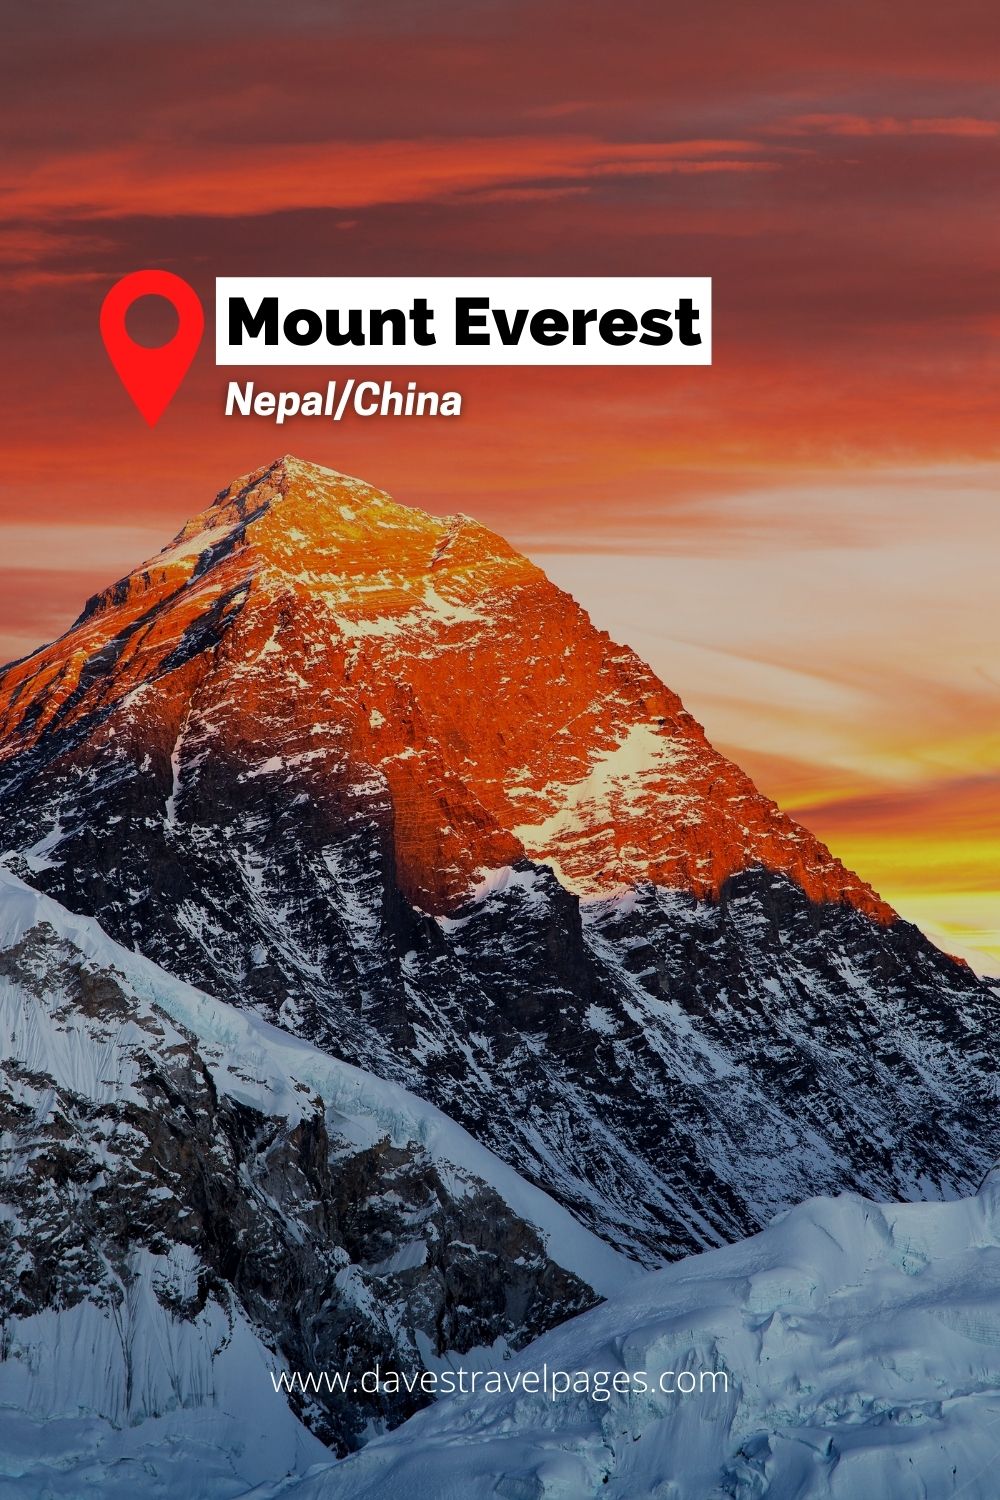 Mount Everest Is The Most Famous Natural Landmark In Asia